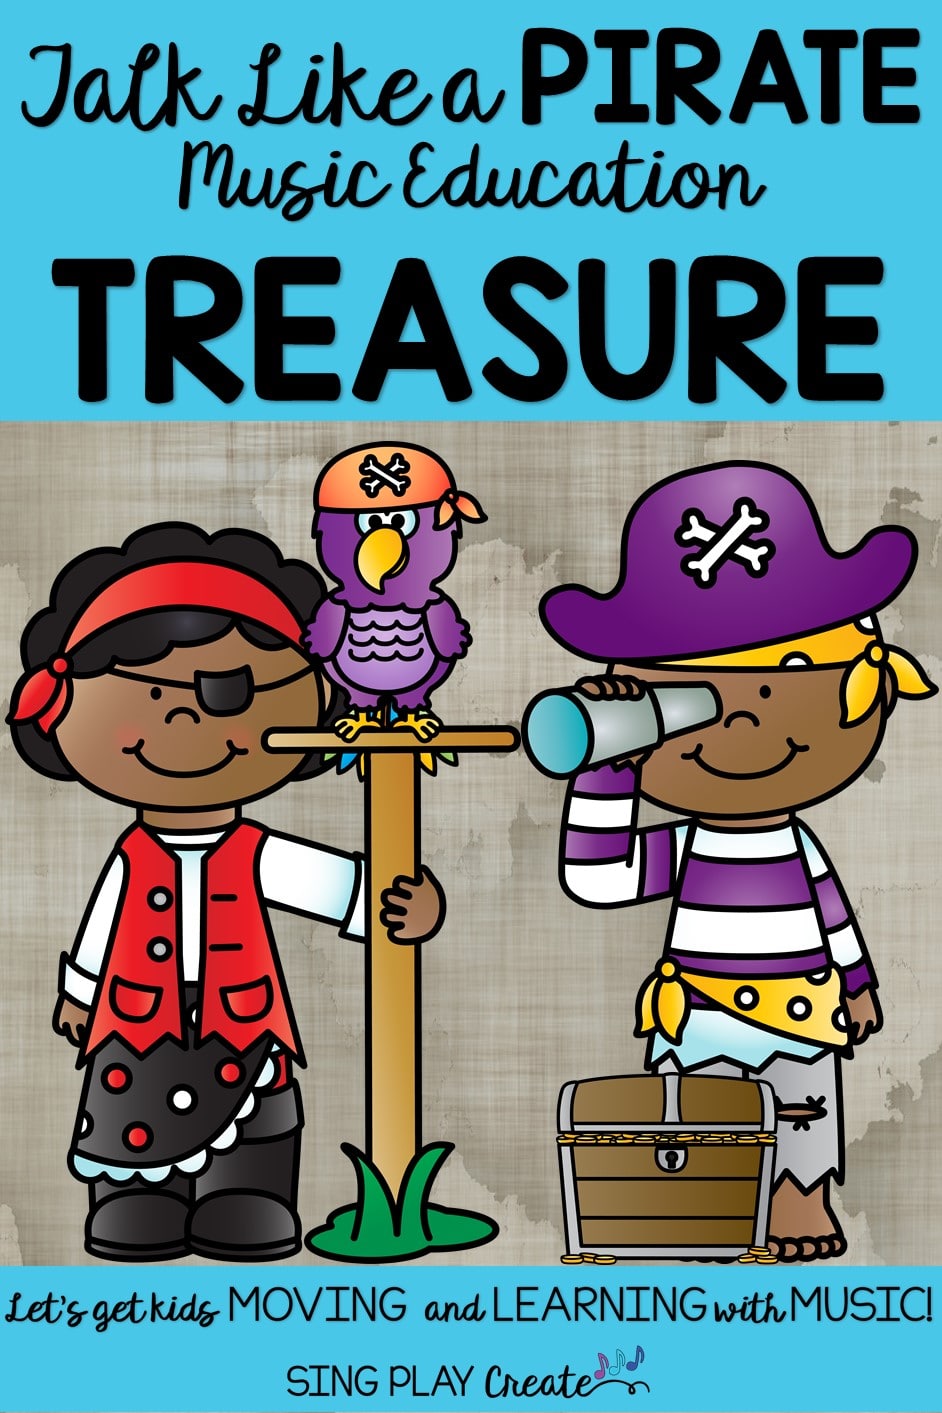 National Talk Like A Pirate Day Music Education Treasures